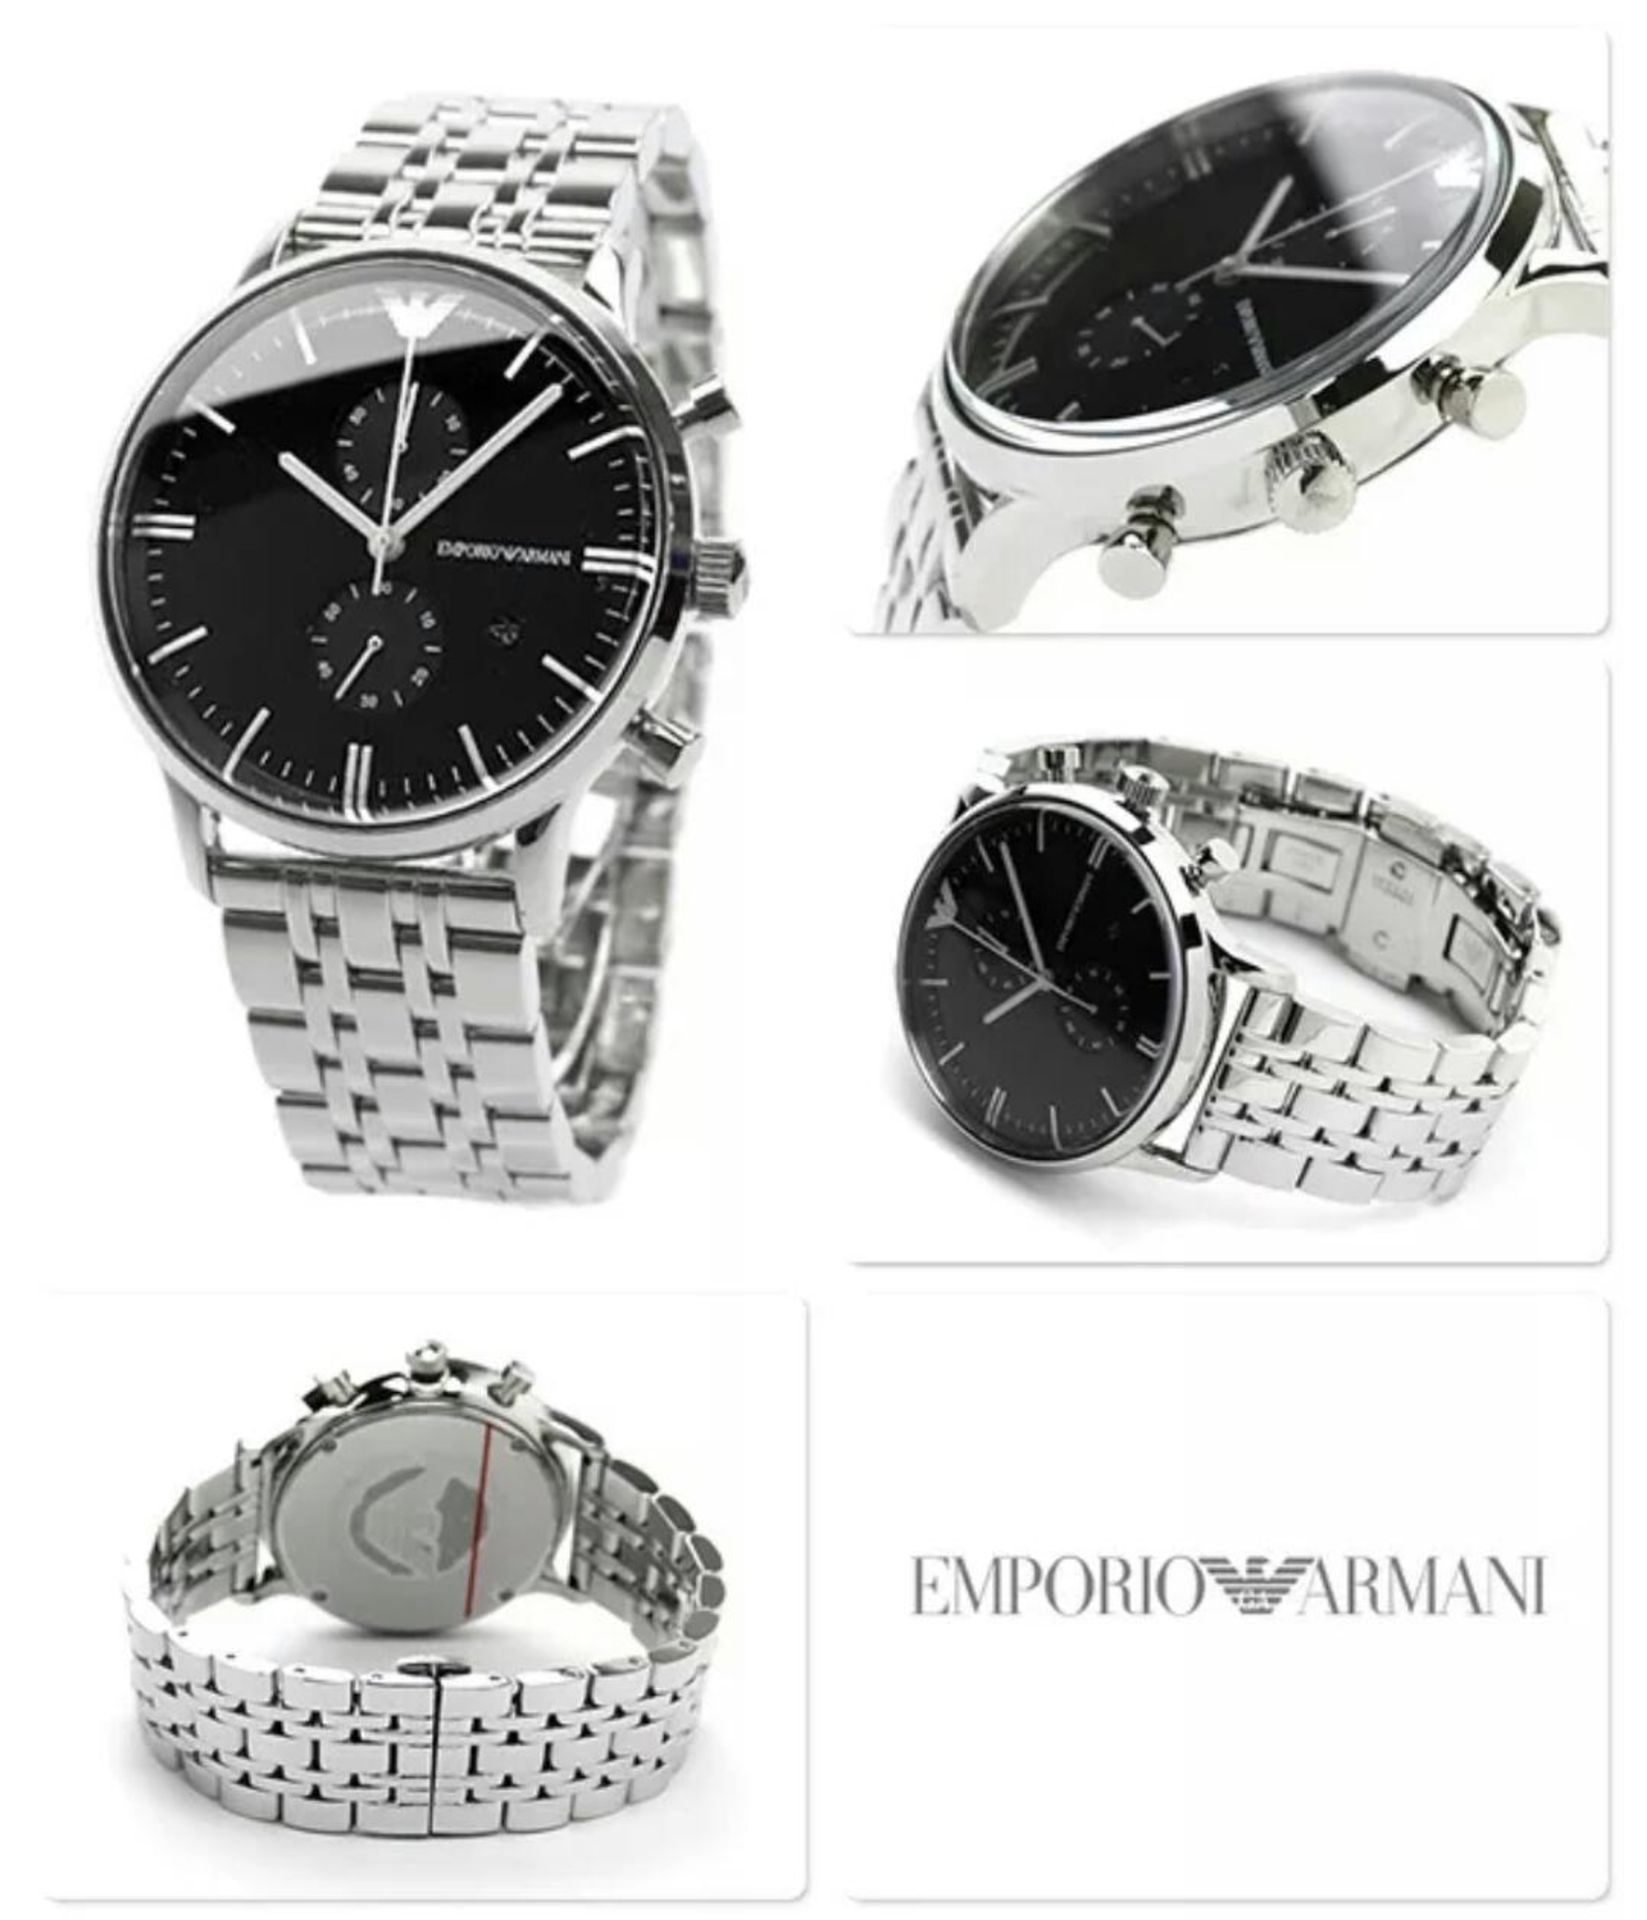 BRAND NEW GENTS EMPORIO ARMANI WATCH, AR0389, COMPLETE WITH ORIGINAL BOX, MANUAL AND CERTIFICATE - - Bild 2 aus 2